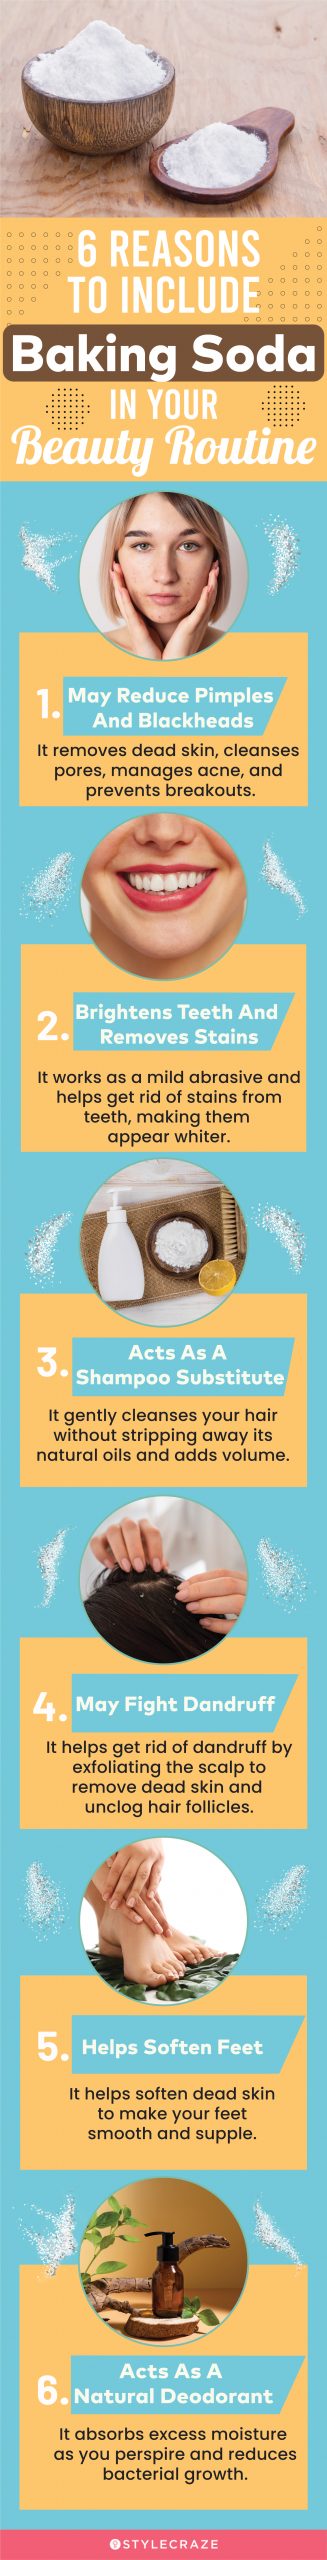 6 reasons to include baking soda in your beauty routine [infographic]